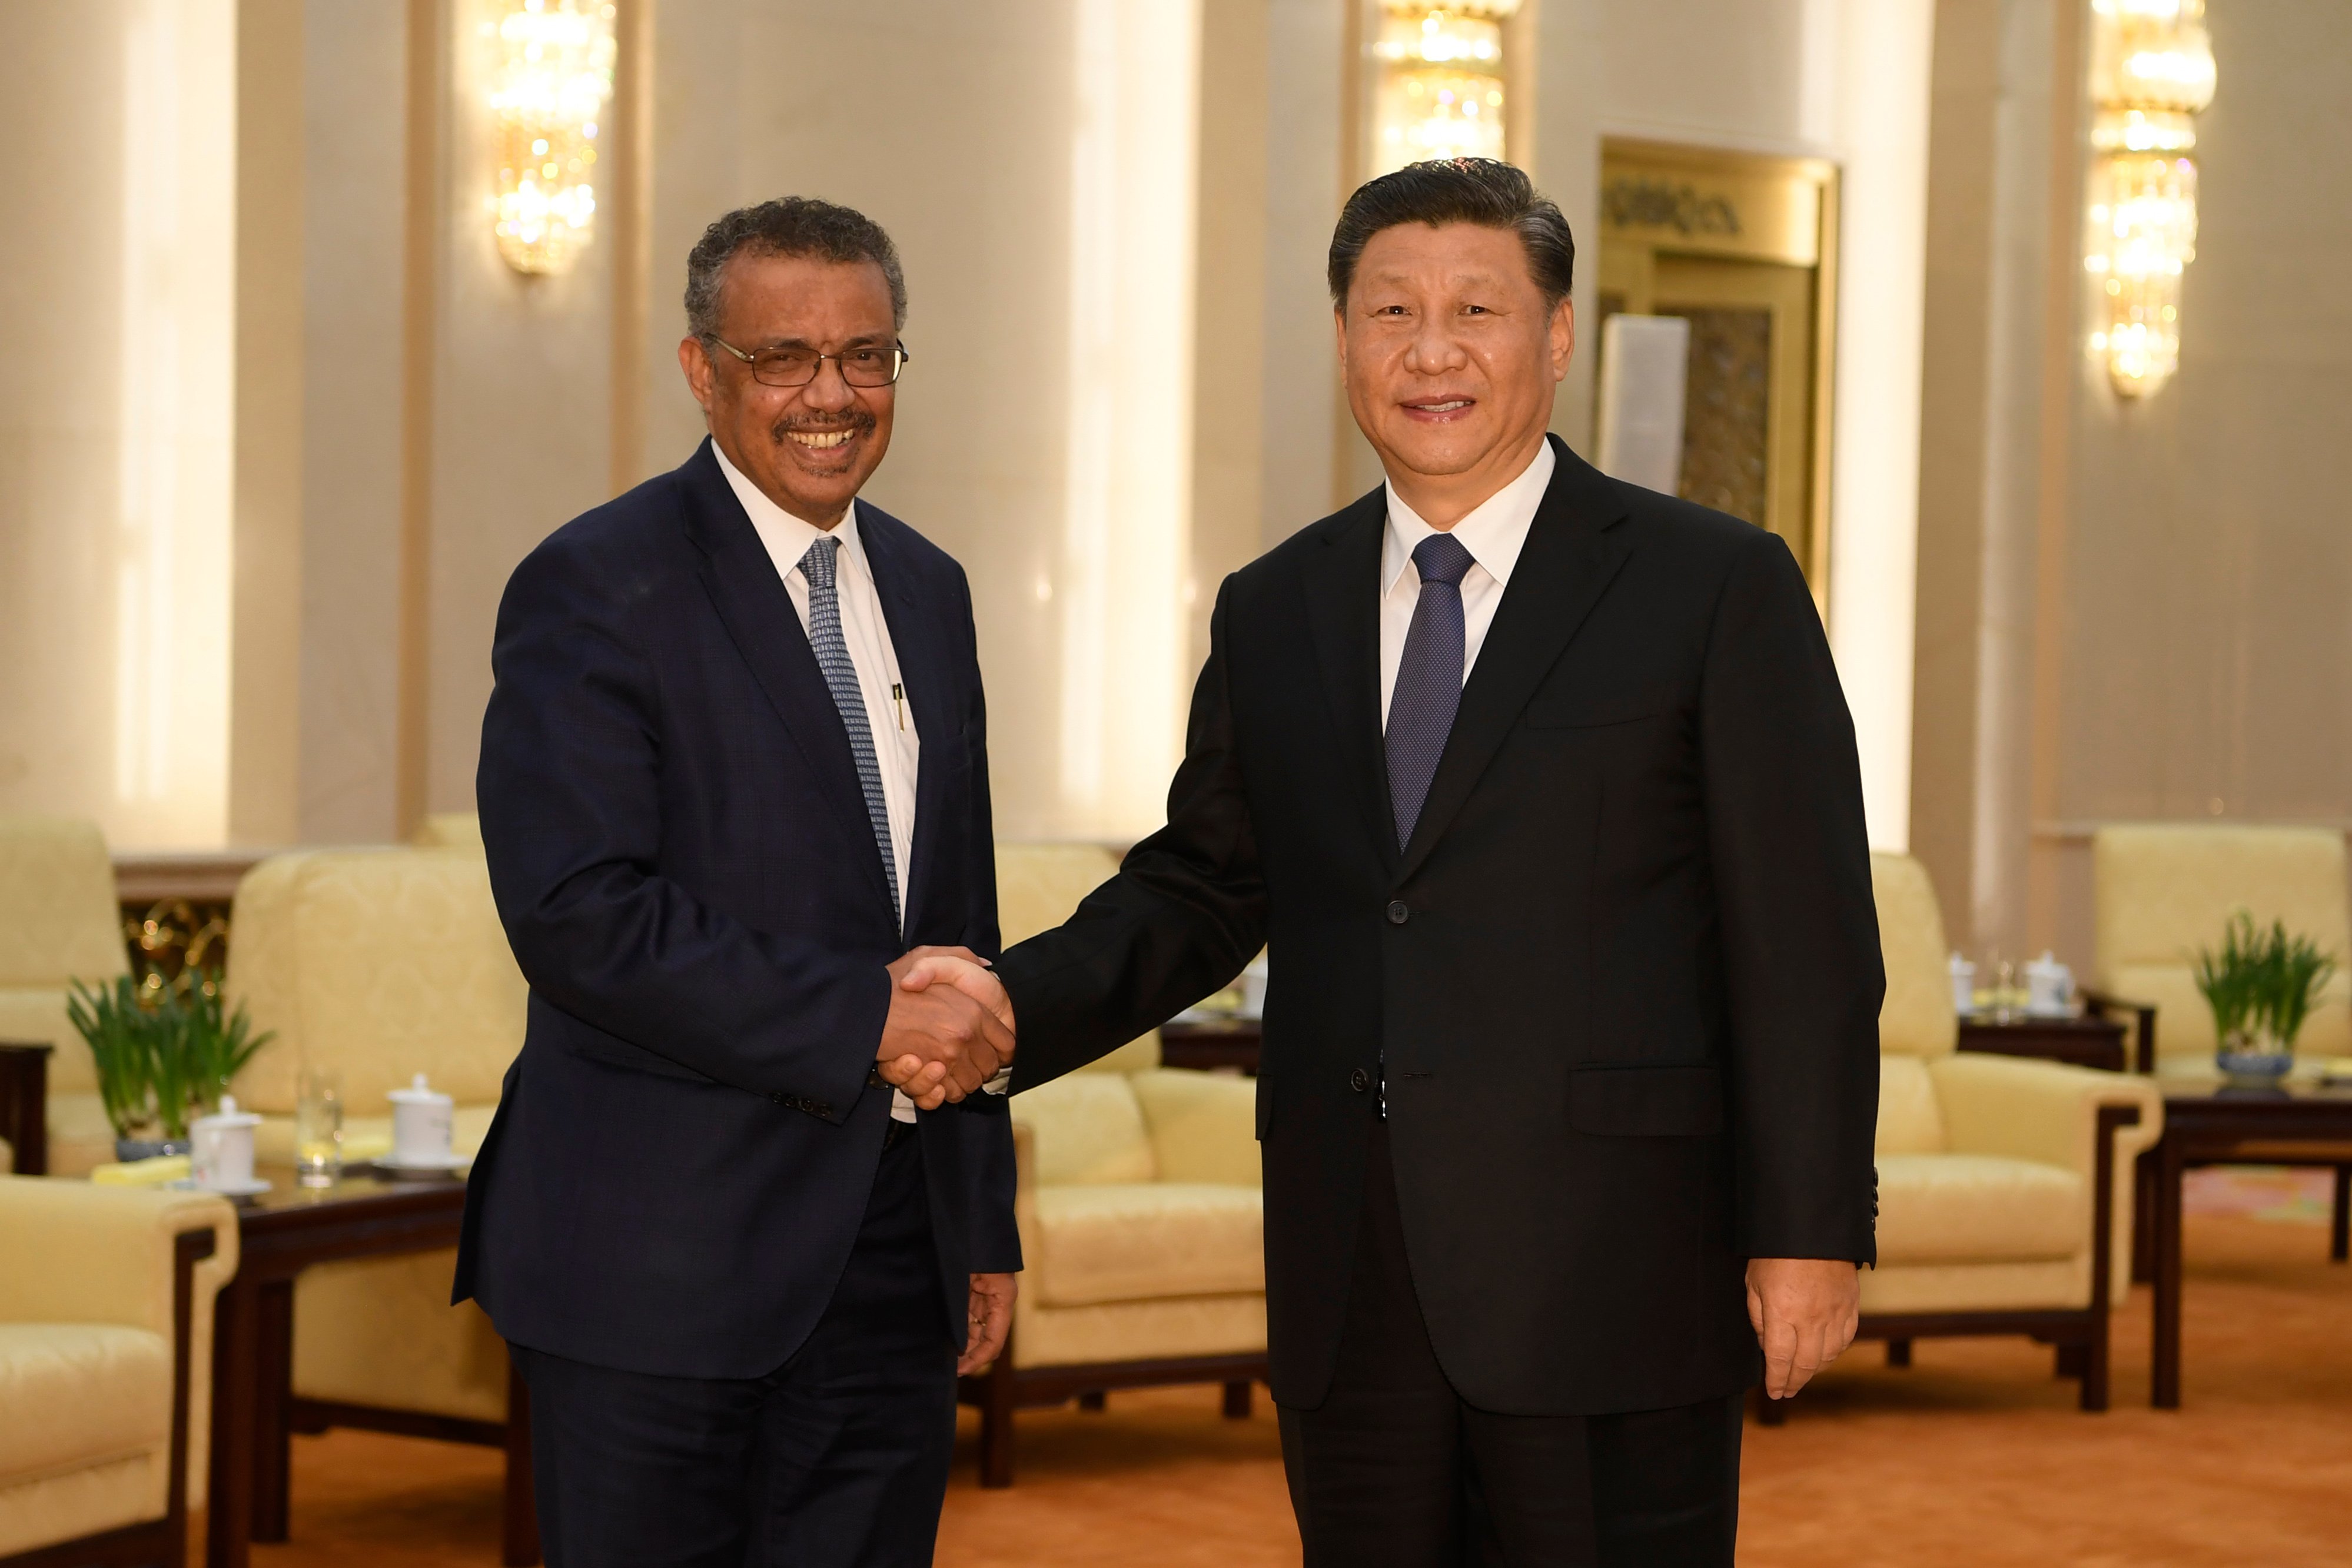 Tedros Adhanom, Director General of the World Health Organization, (L) shakes hands with Chinese President Xi Jinping. (Photo by Naohiko Hatta - Pool/Getty Images)